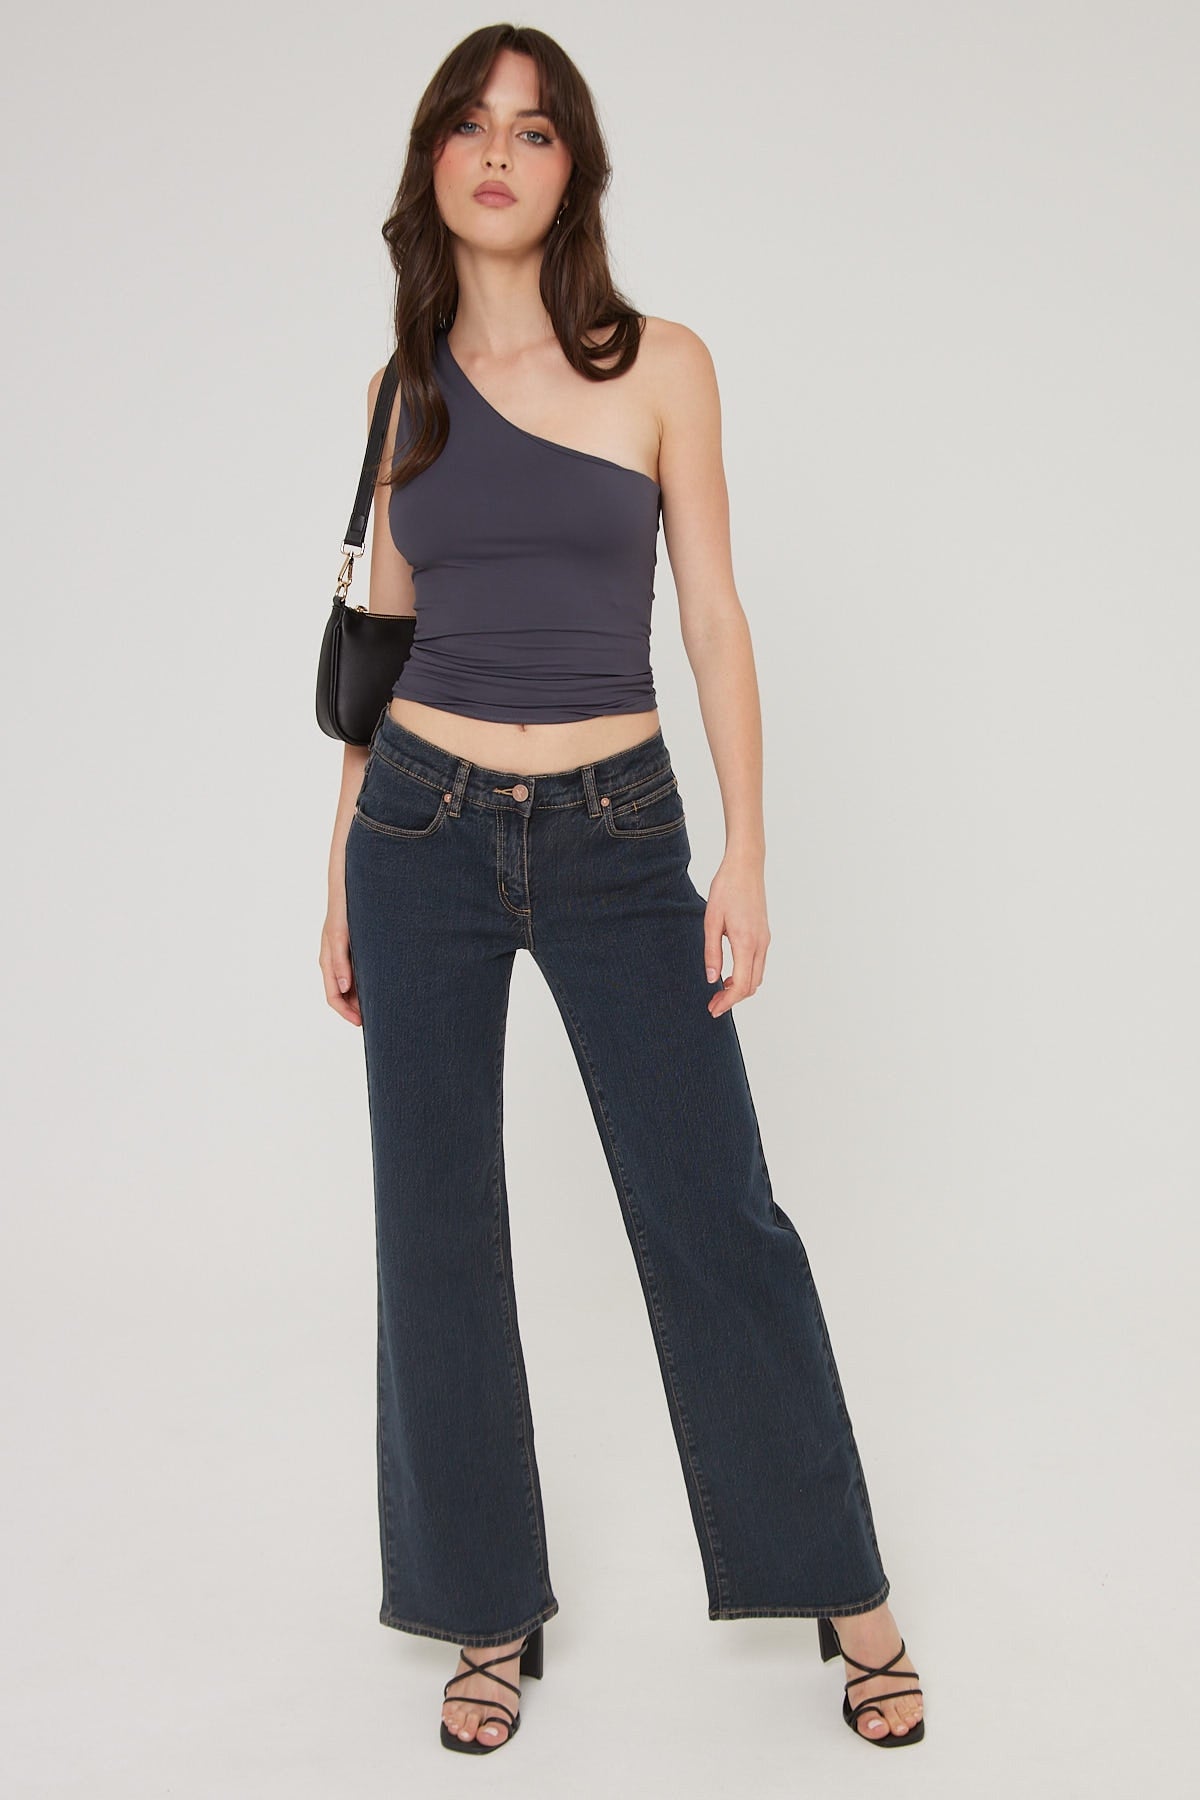 L&T Ruched One Shoulder Top Charcoal